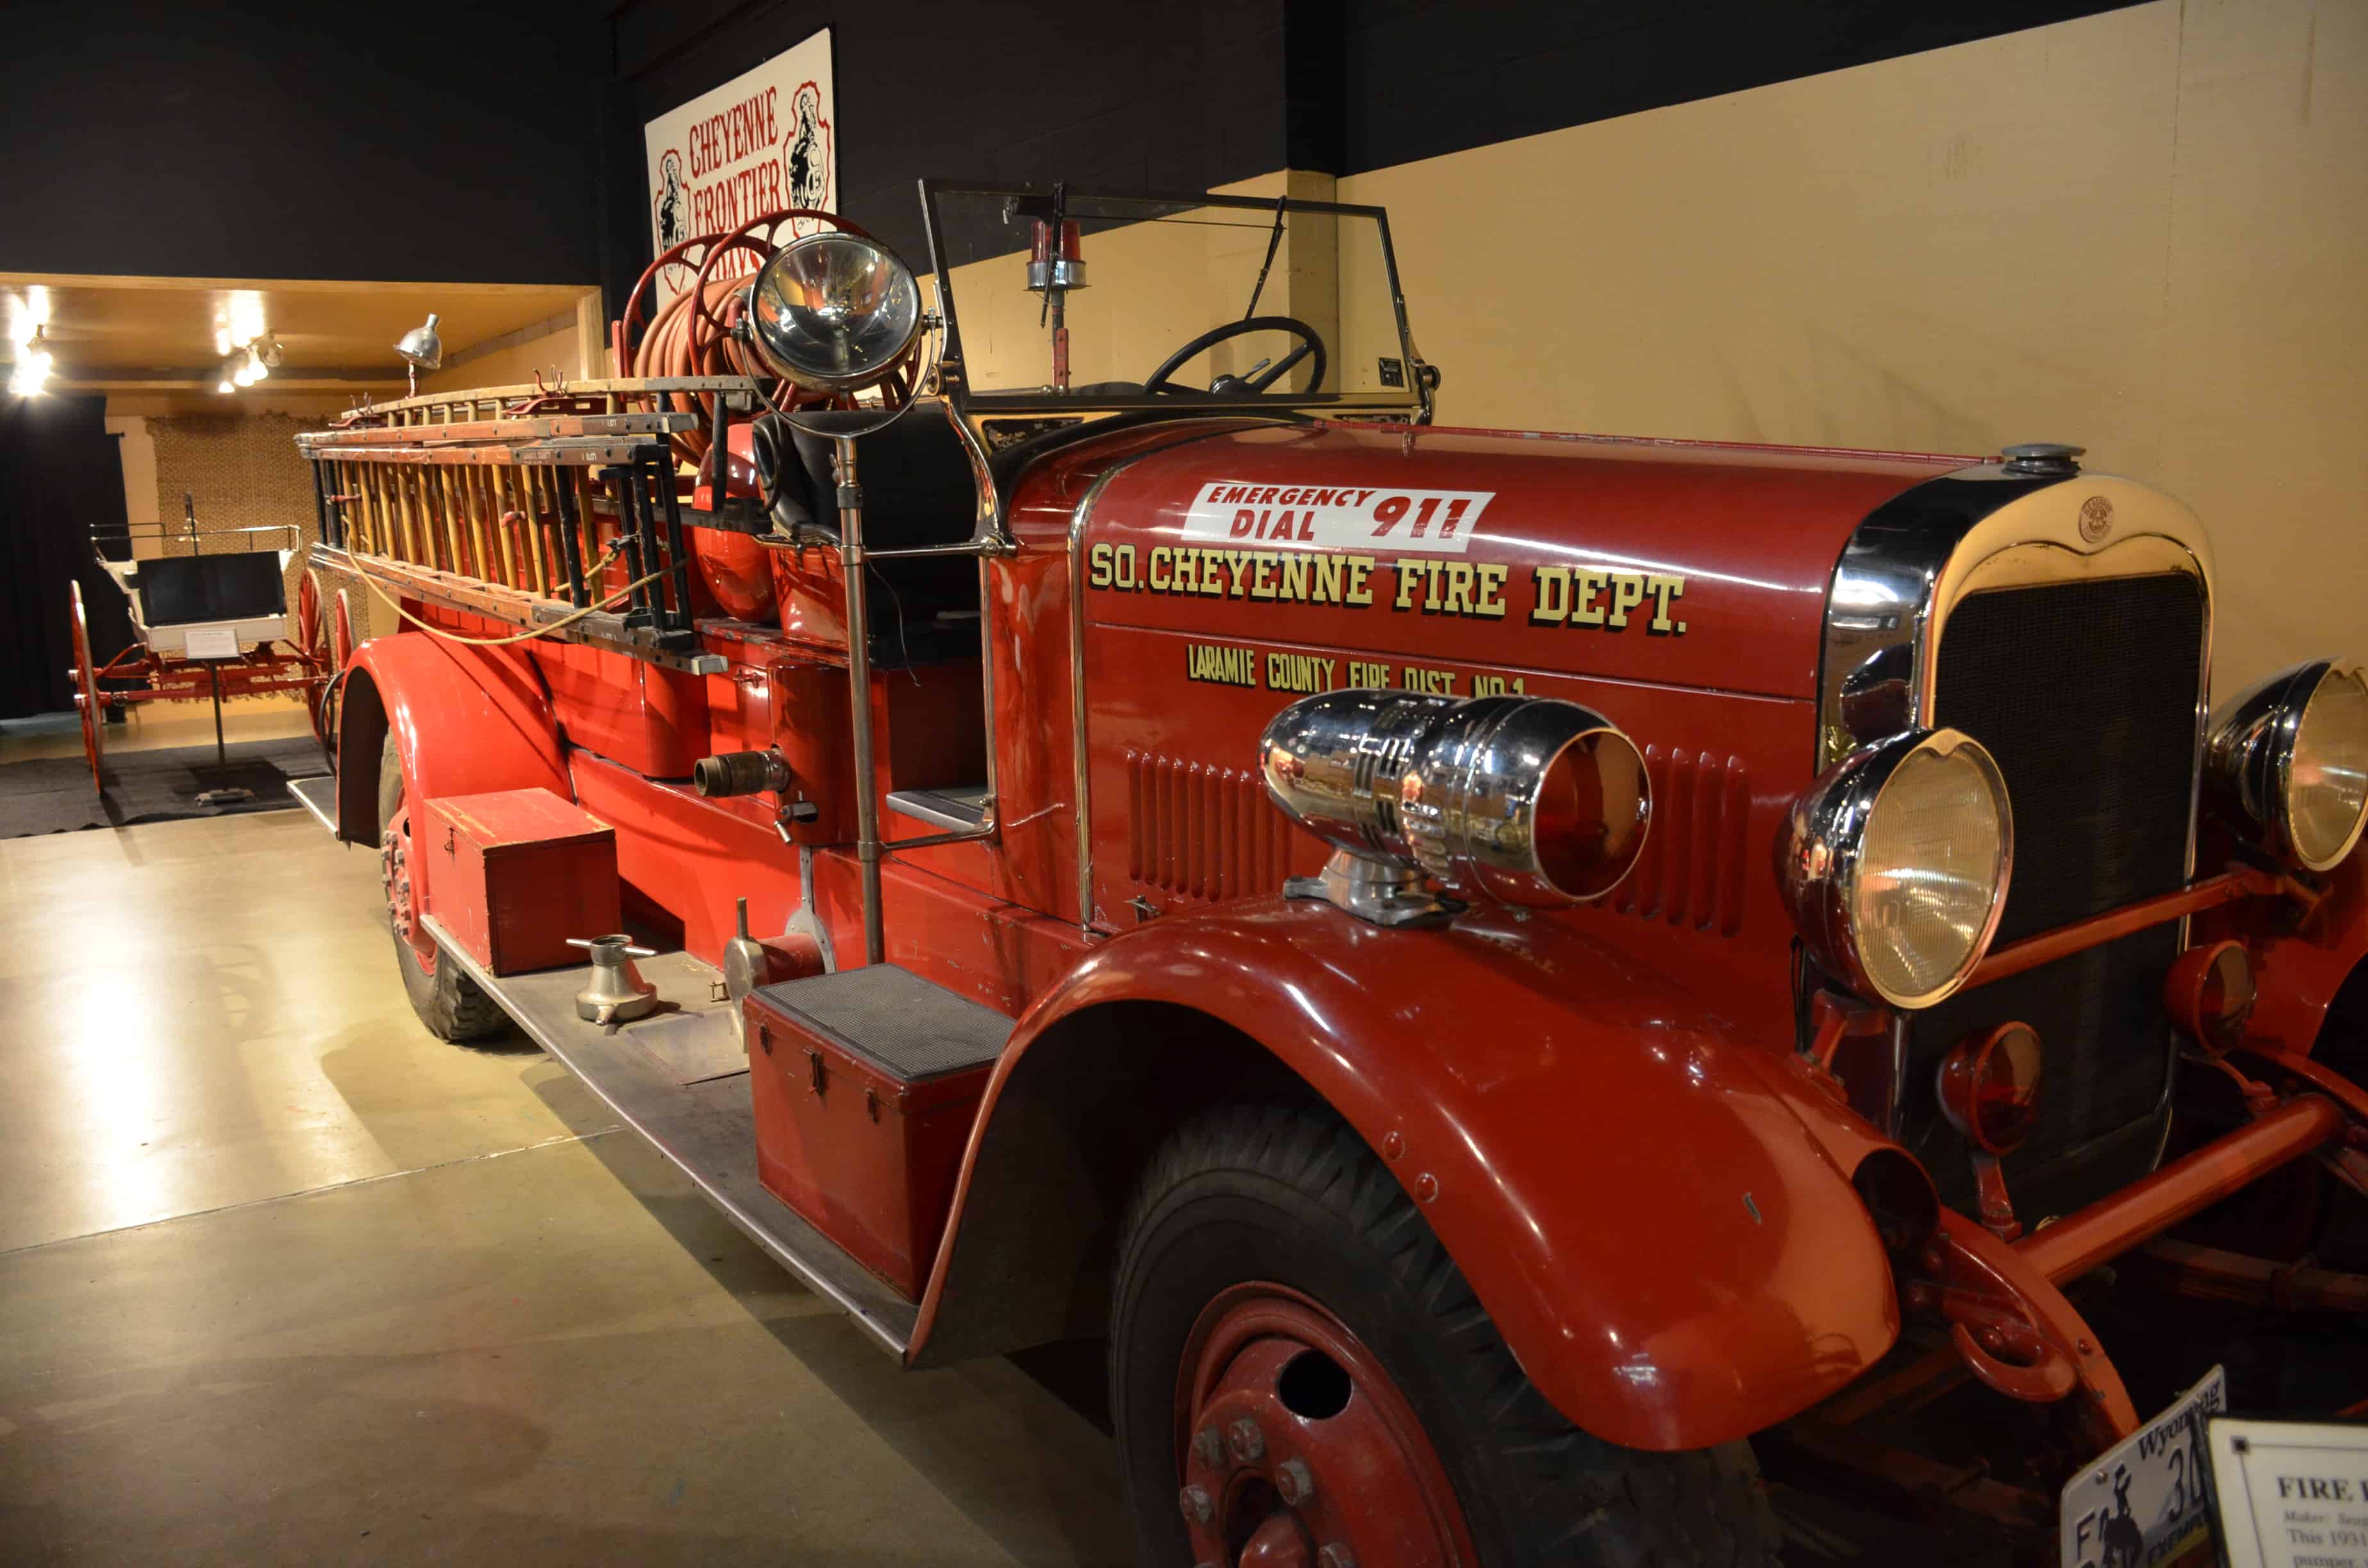 Fire engine at the Cheyenne Frontier Days Old West Museum in Wyoming